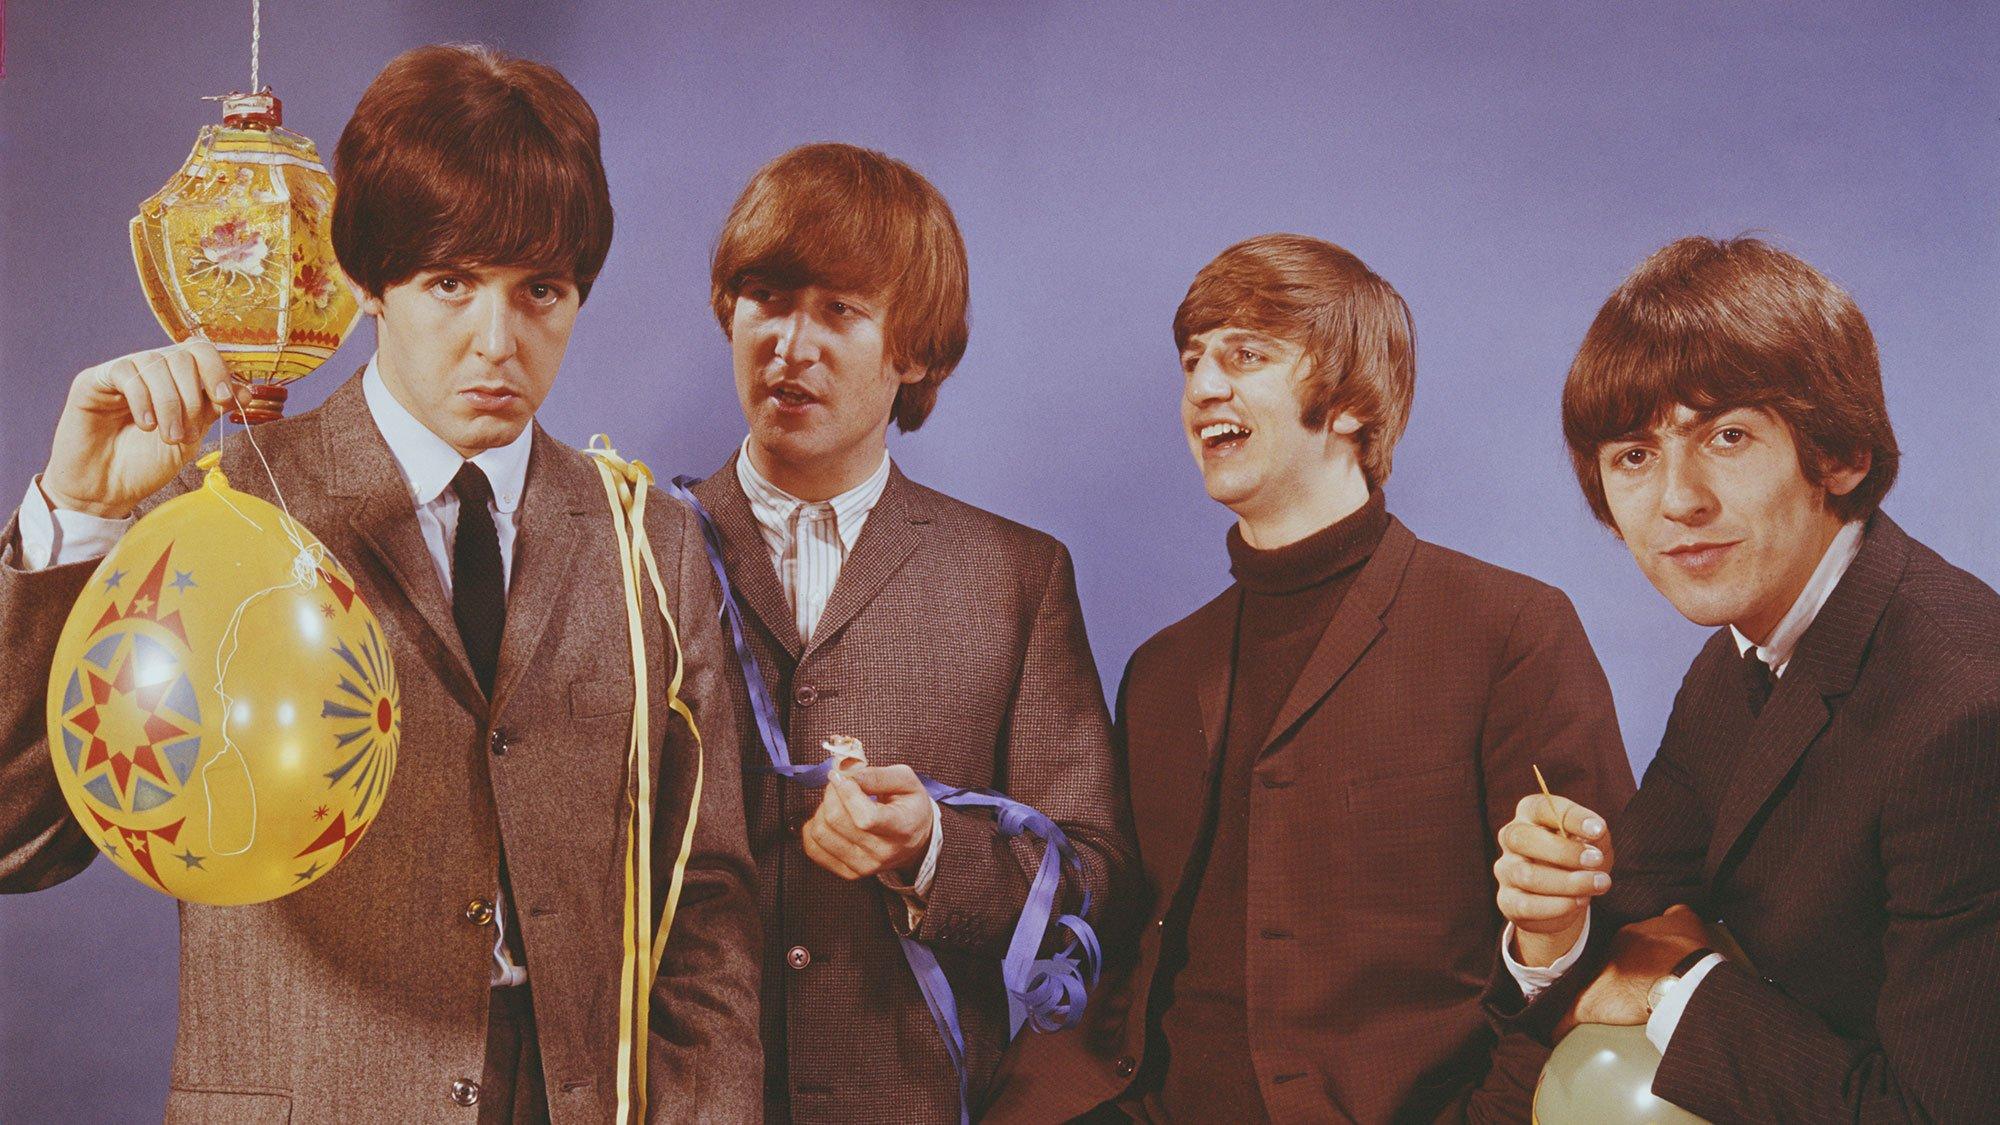 Meet The Beatles!' Turns 60: Inside The Album That Launched